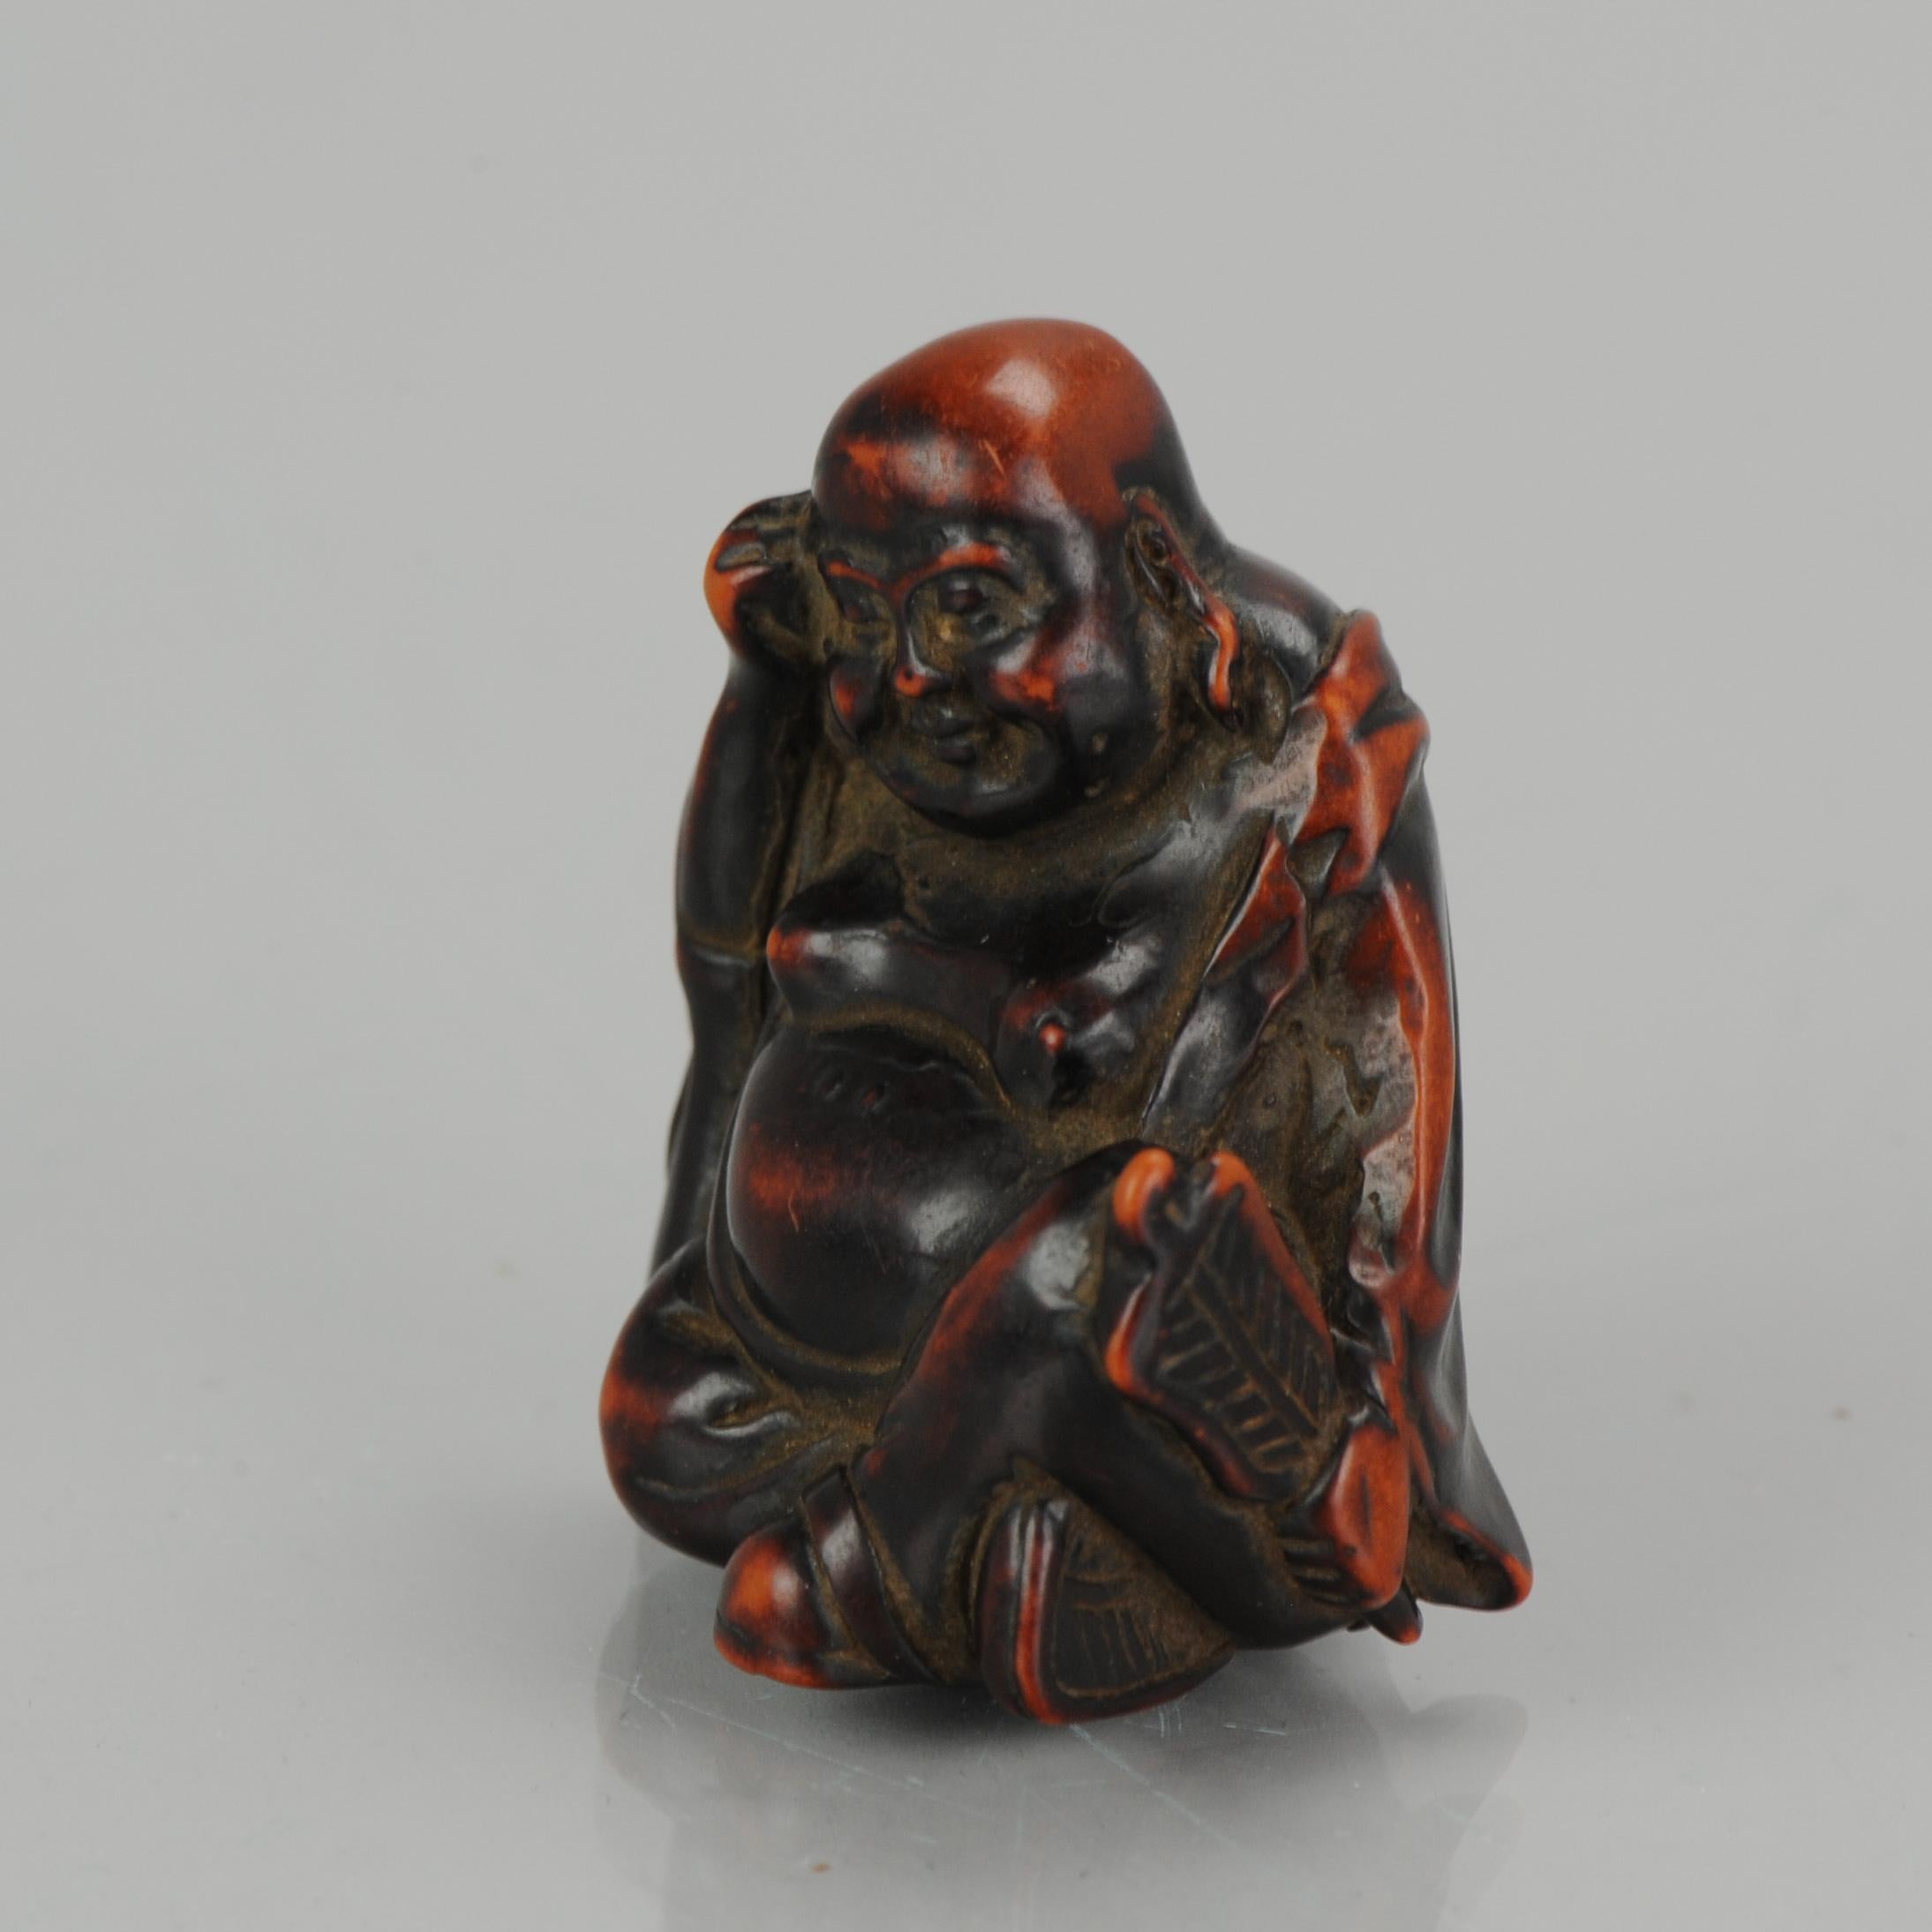 Porcelain Antique Lacquer or Ceramic Netsuke Hotei with Fan 19th Century, Japanese, Japan